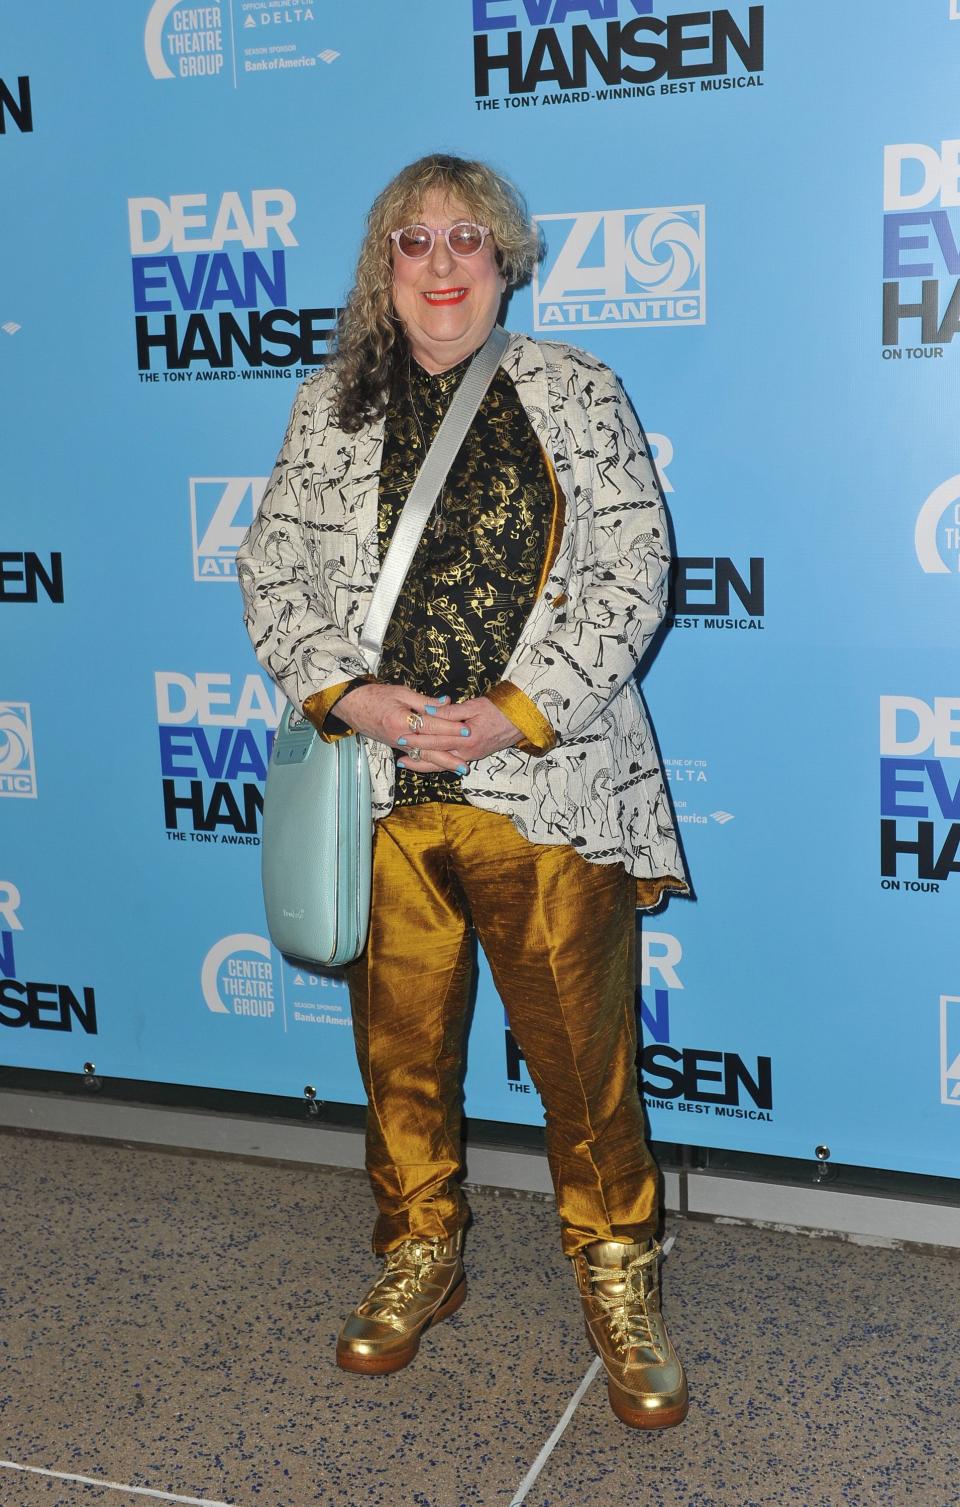 Allee Willis poses at Dear Evan Hansen premiere wearing a sequined top and gold pants